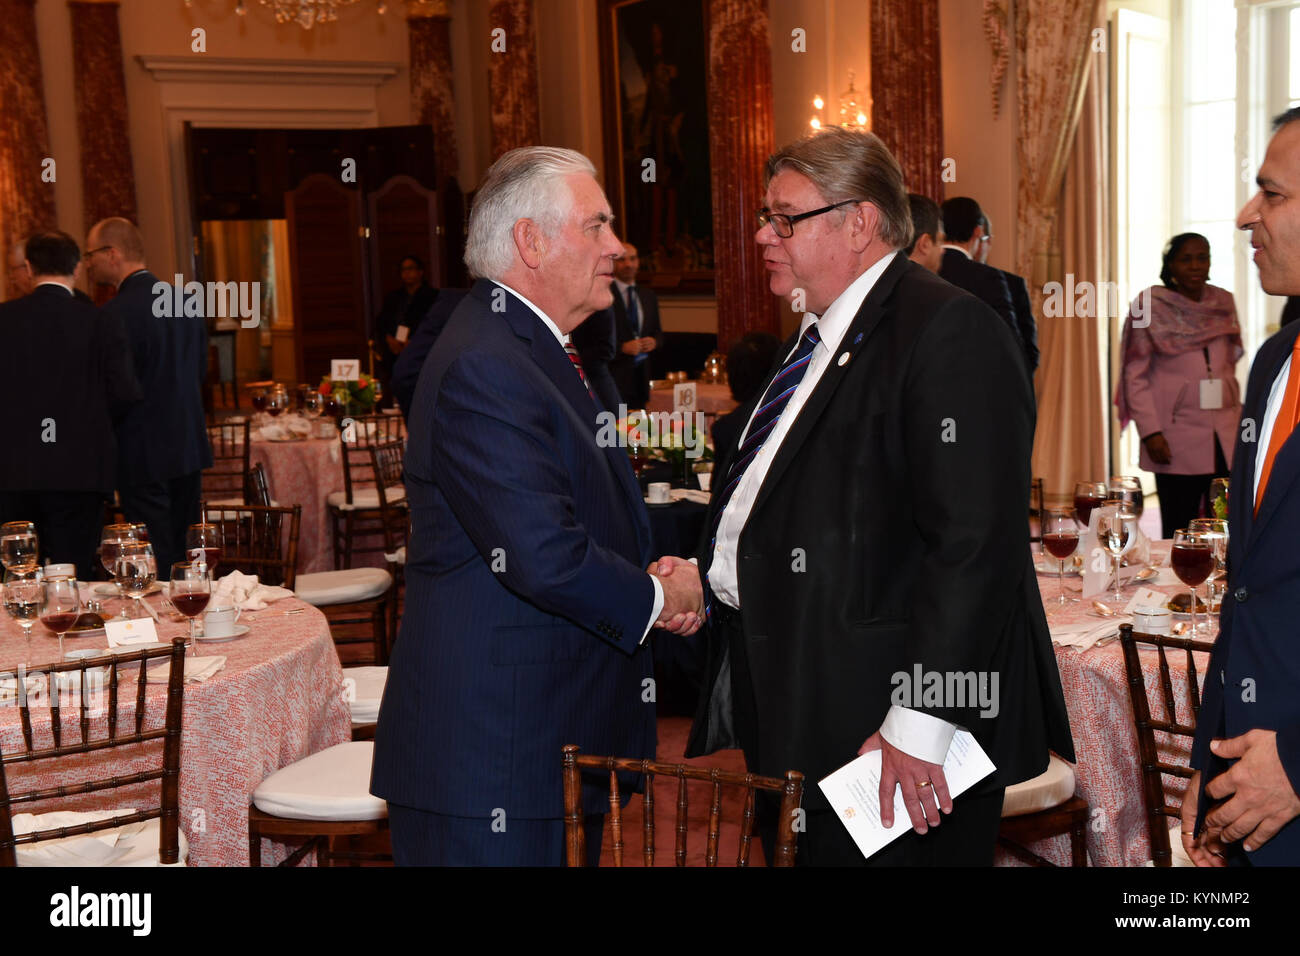 U.S. Secretary of State Rex Tillerson greets Finland Foreign Minister Timo Juhani Soini during the working lunch for members of the Ninth Community of Democracies Governing Council Ministerial, at the U.S. Department of State in Washington, D.C. on September 15, 2017. Stock Photo